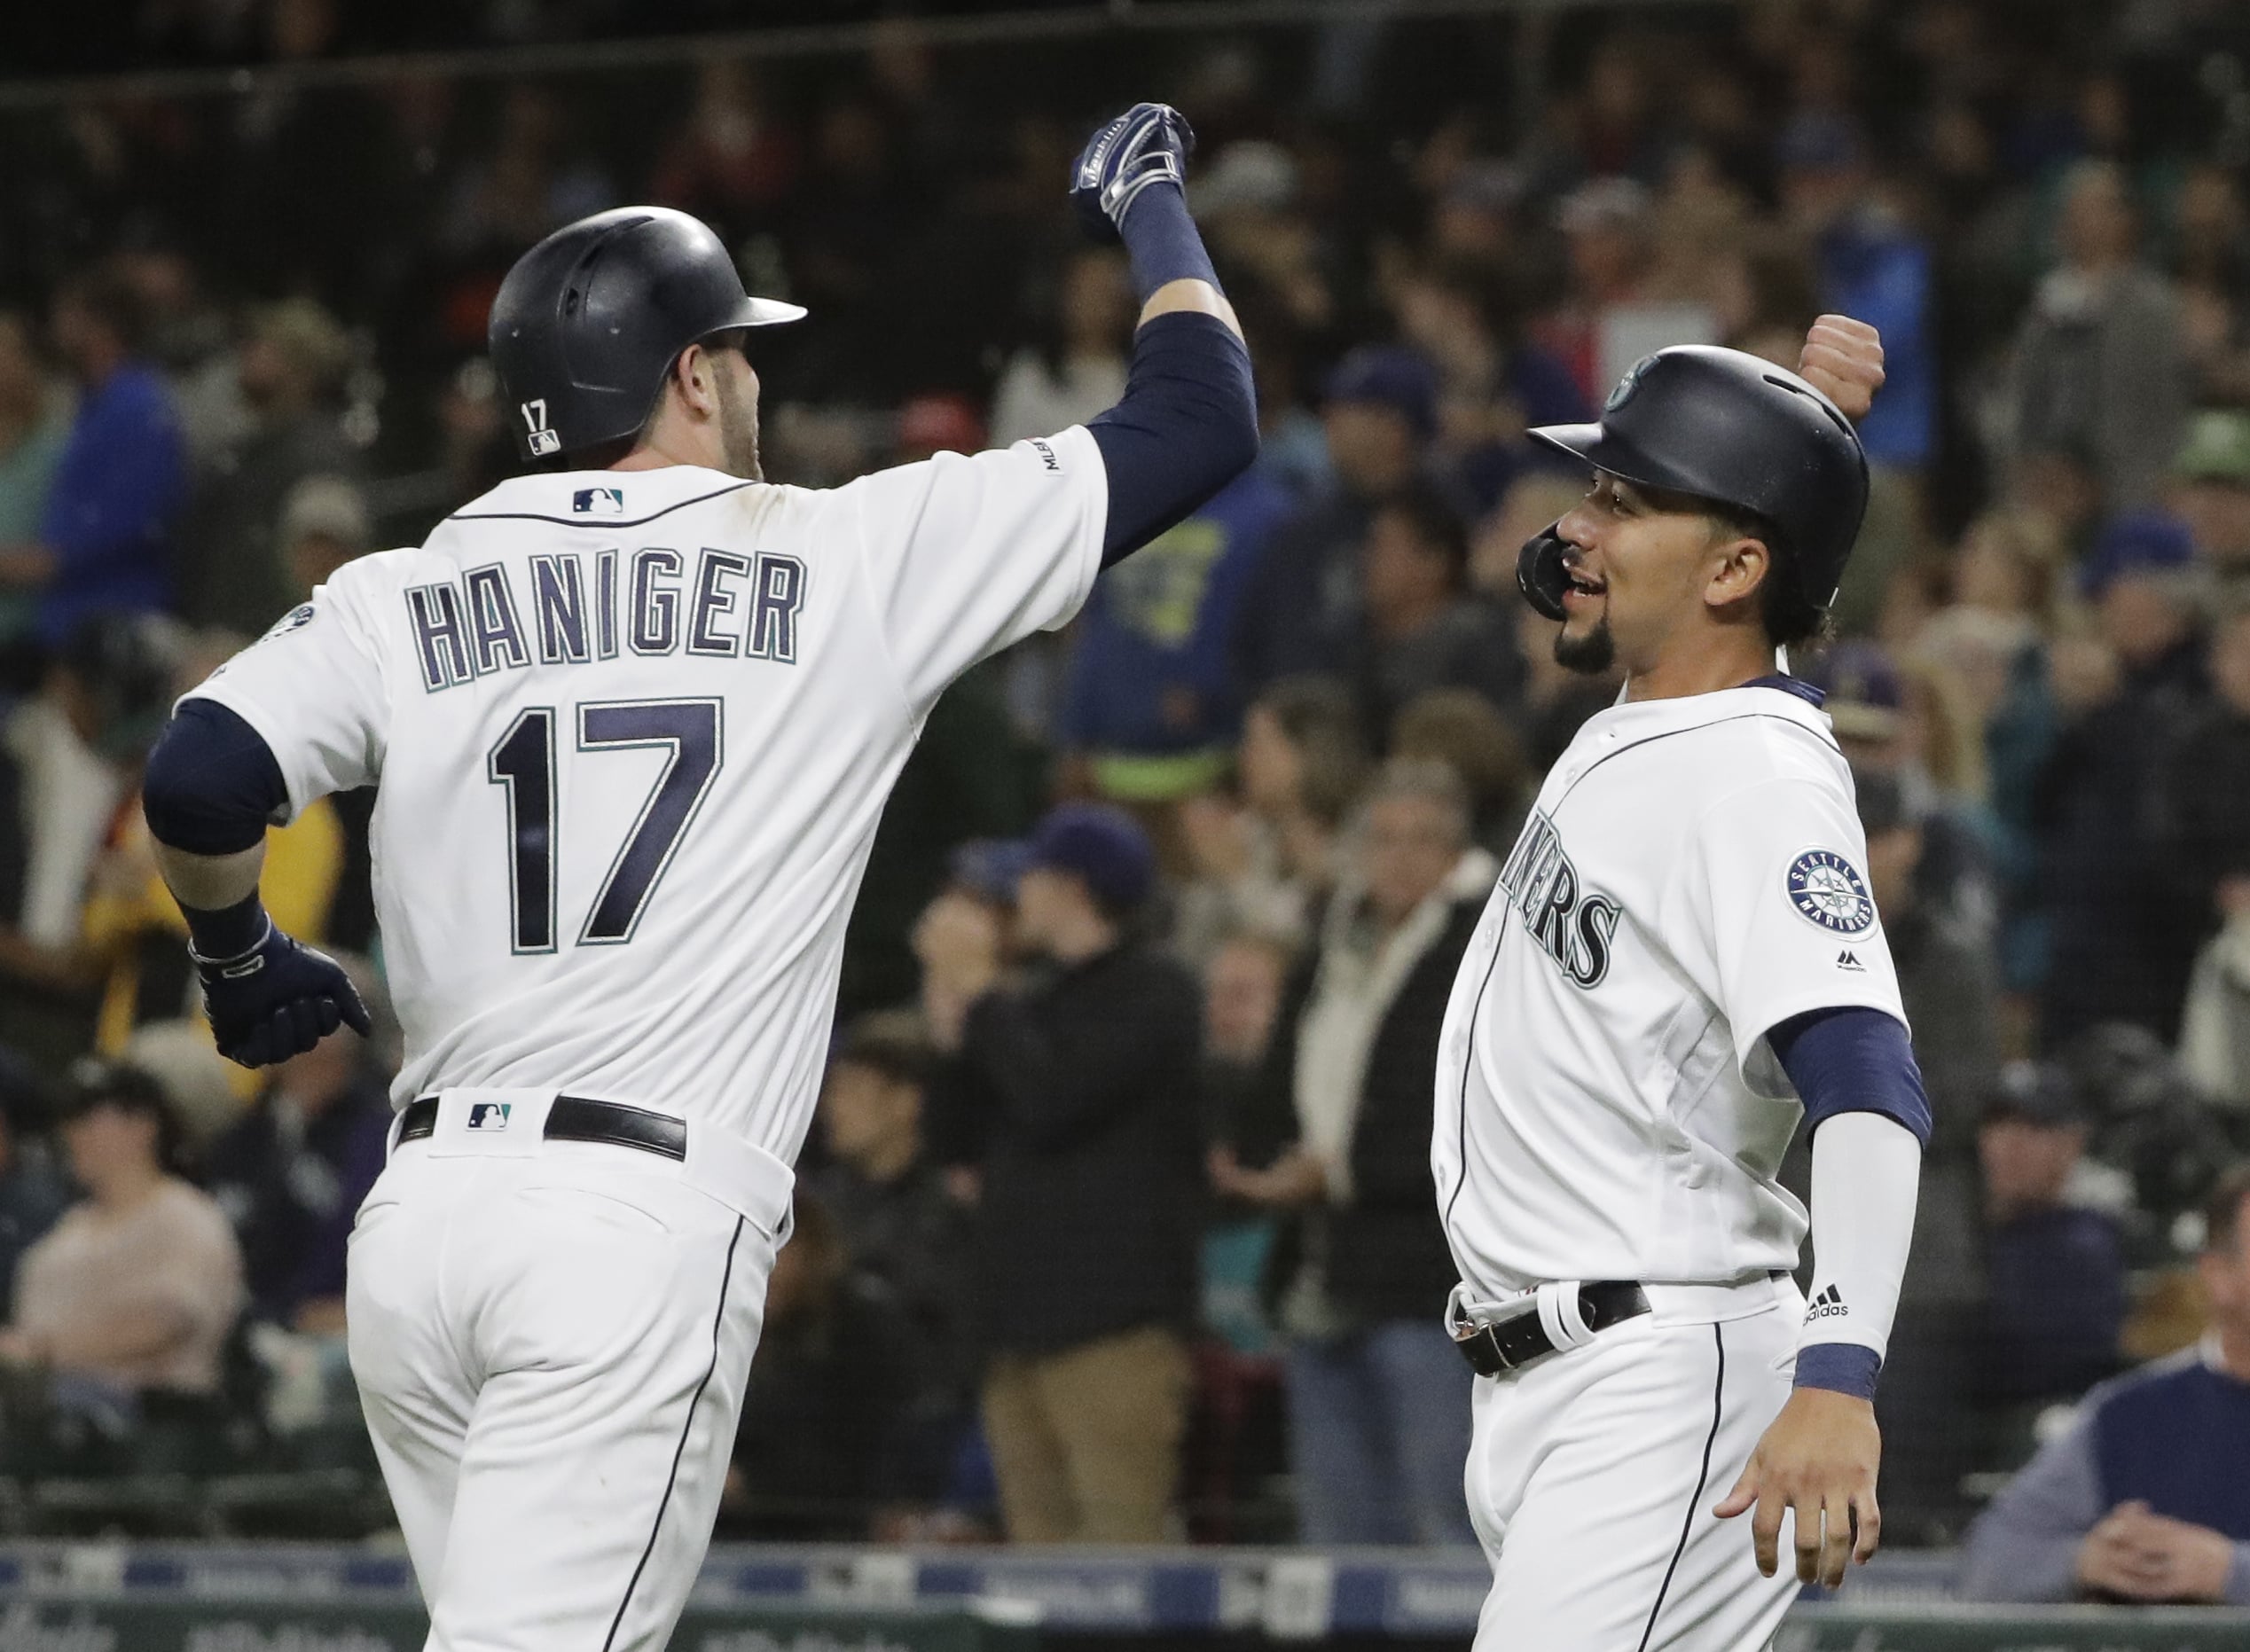 Seattle Mariners' Mitch Haniger is greeted at the dugout by J.P. Crawford after Haniger hit a two-run home run to score Crawford during the fifth inning of the team's baseball game against the Oakland Athletics, Tuesday, May 14, 2019, in Seattle. (AP Photo/Ted S.